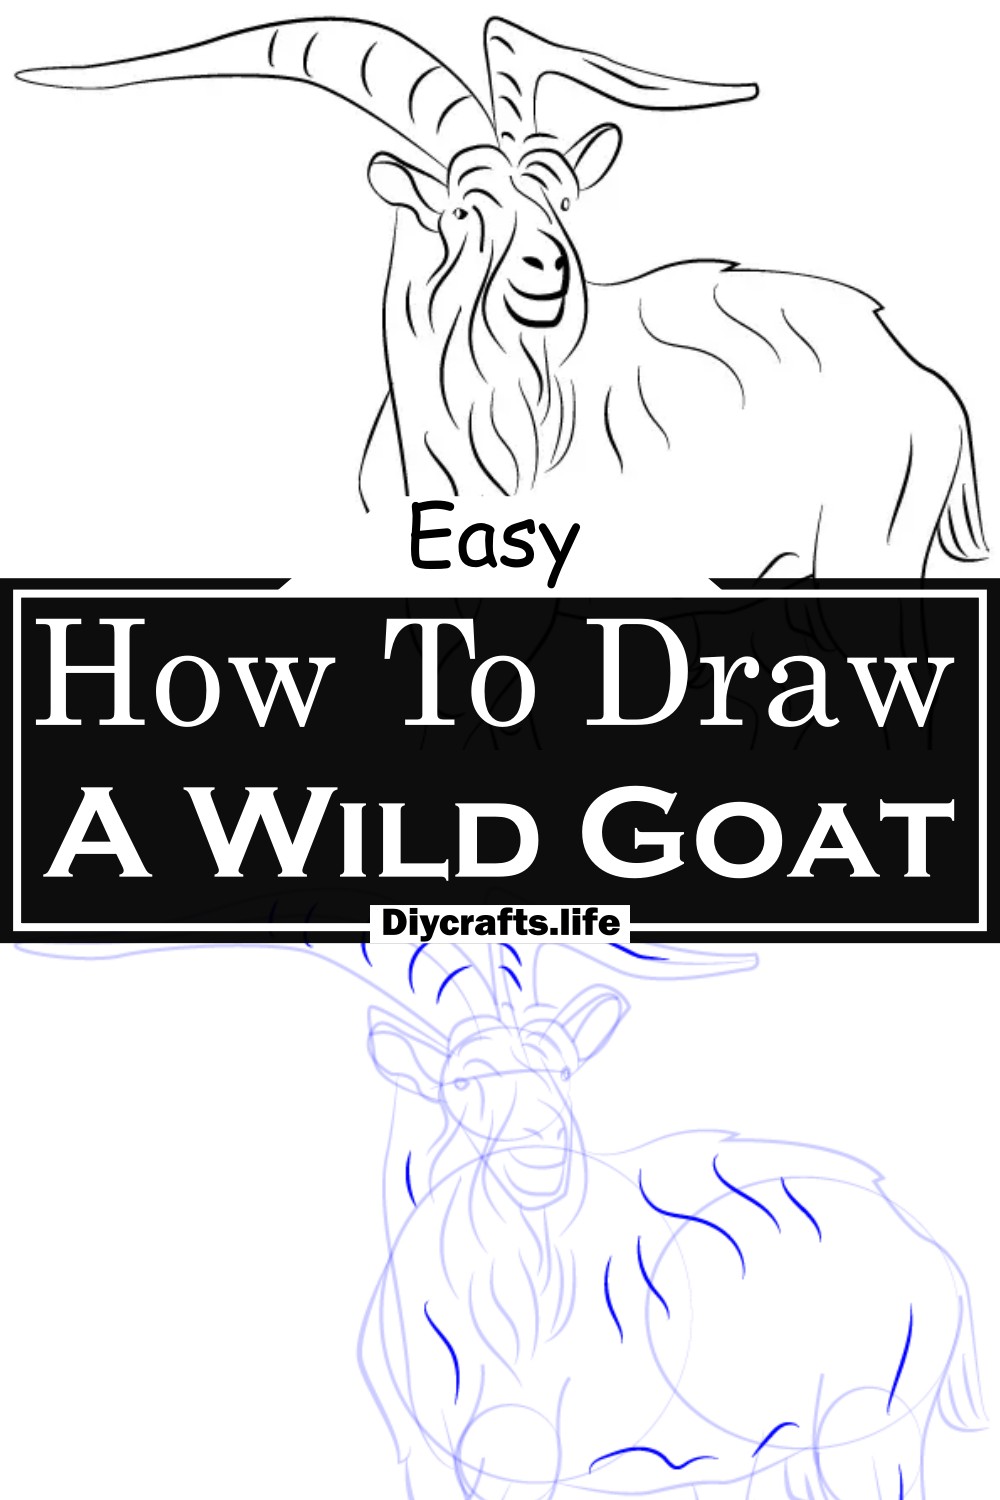 How To Draw A Wild Goat